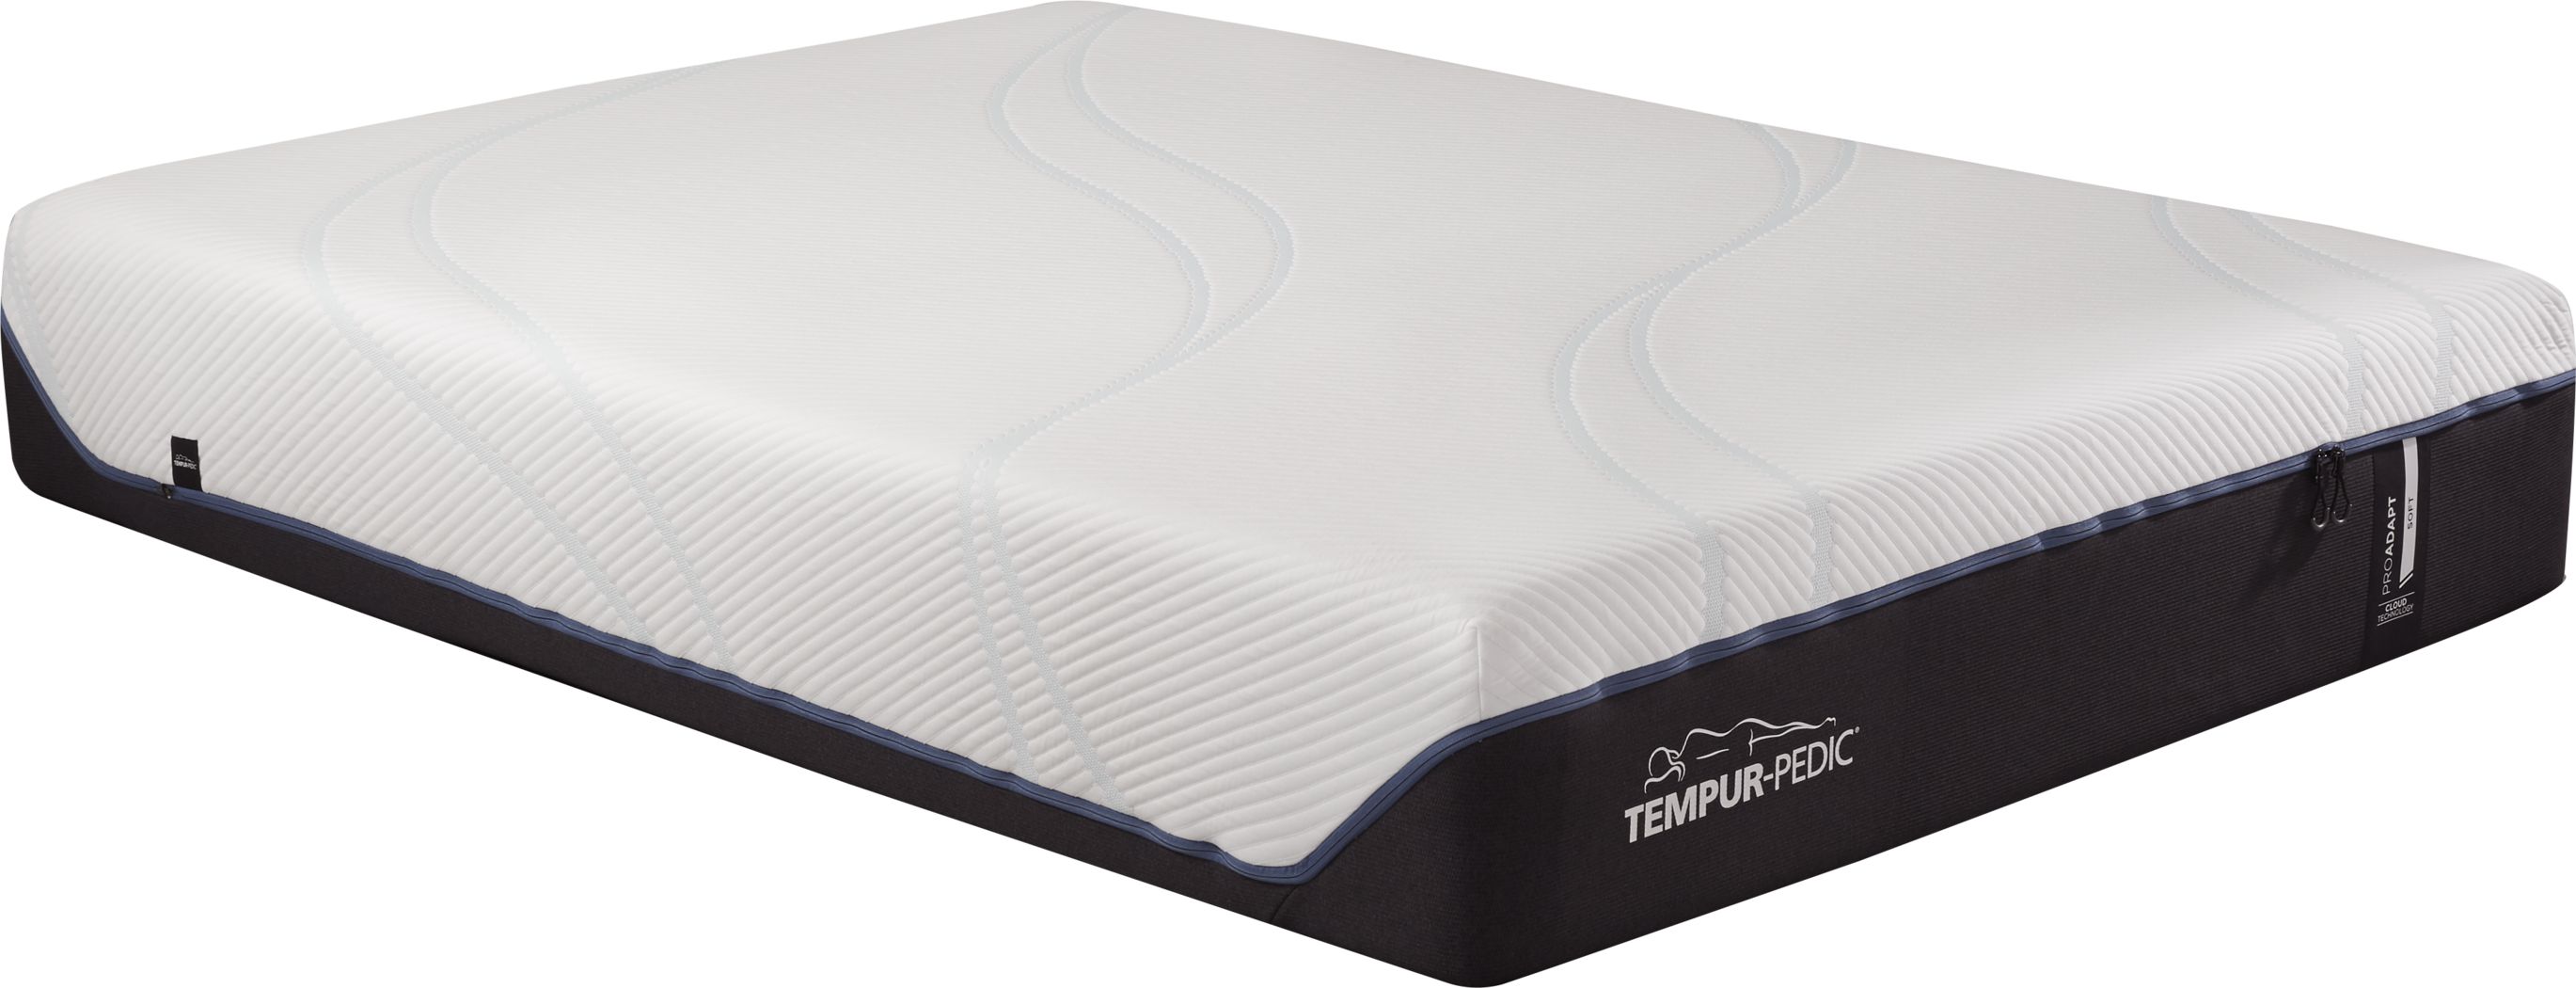 Best Of 56+ Beautiful tempur king single mattress Most Trending, Most Beautiful, And Most Suitable